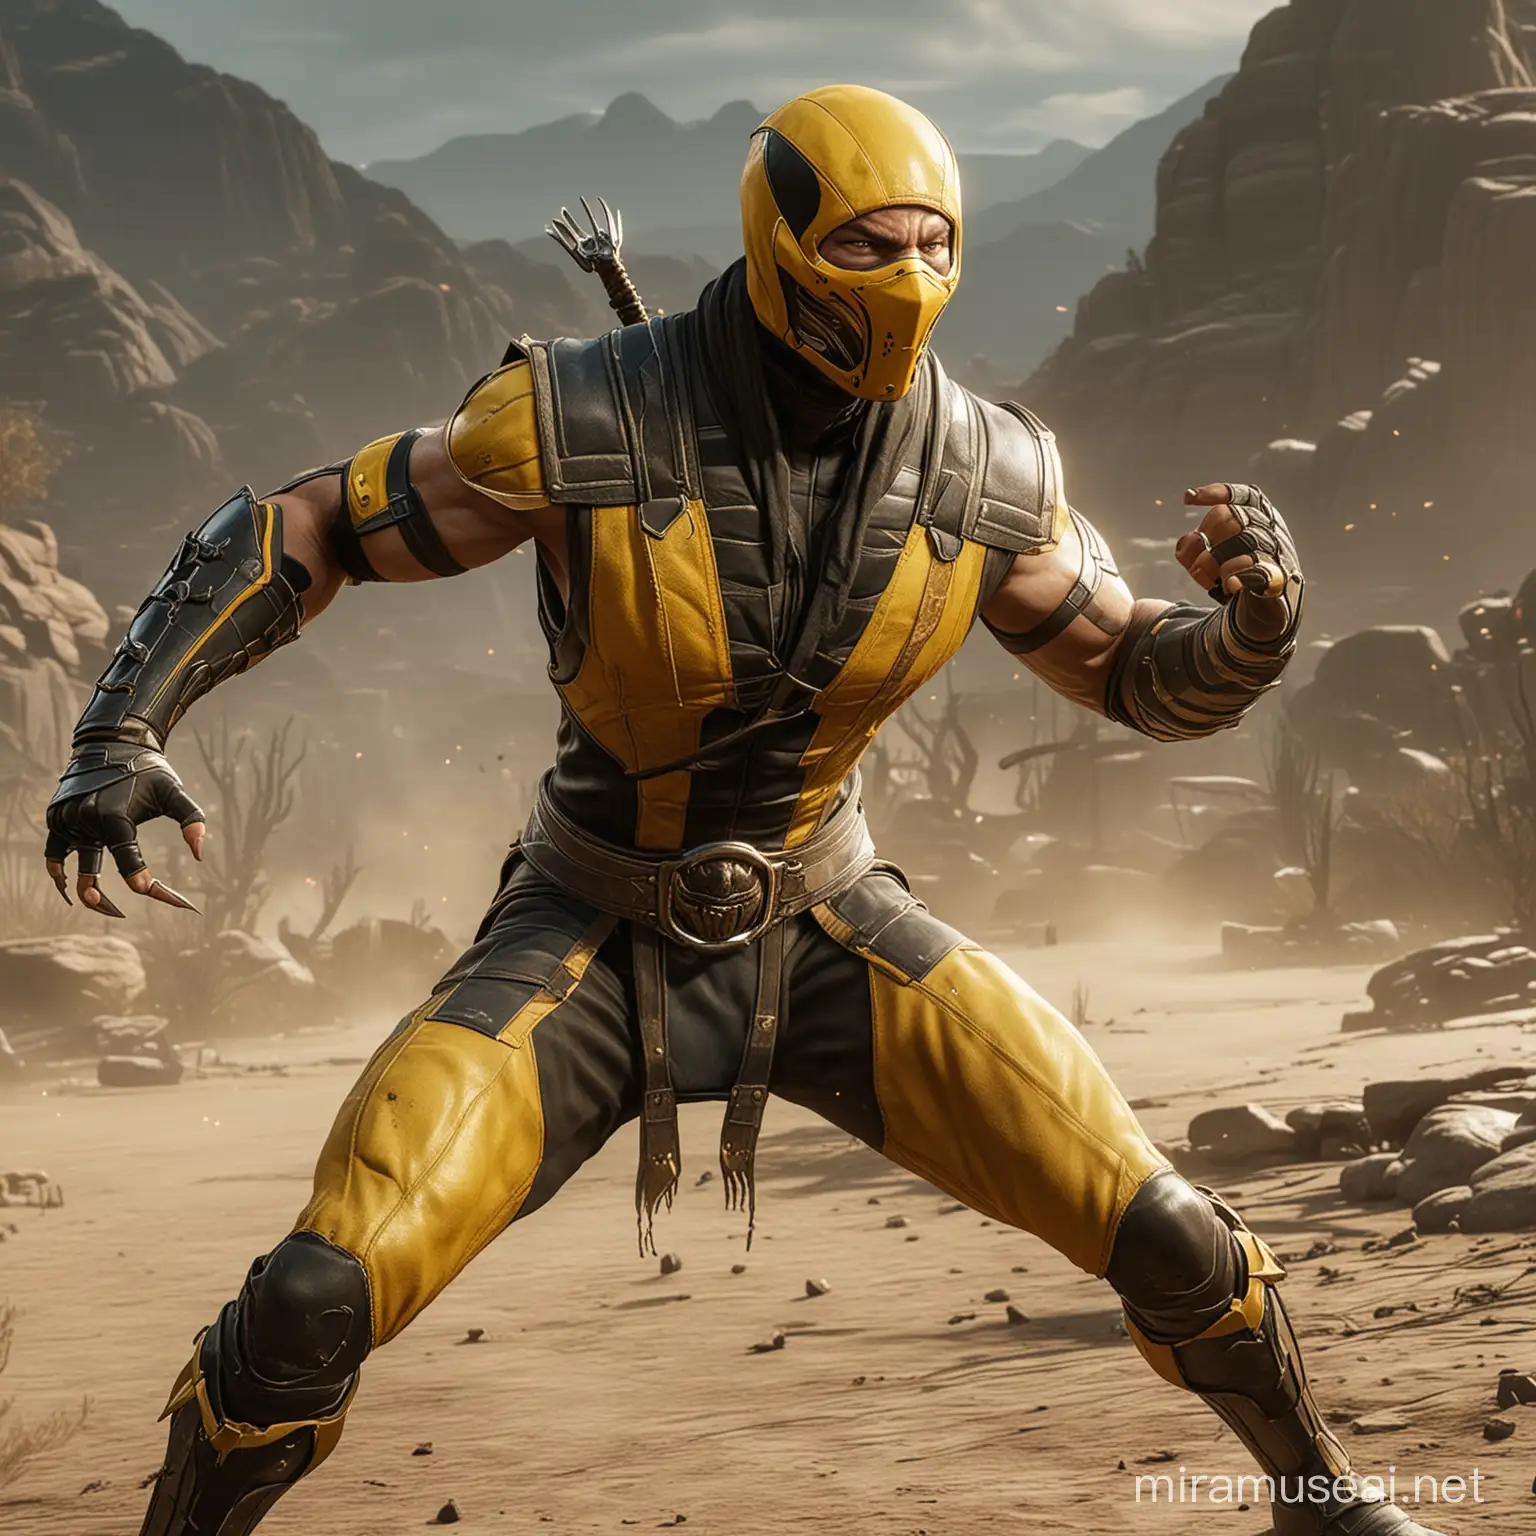 Scorpion from Mortal Kombat 11 Delivering a Powerful Punch